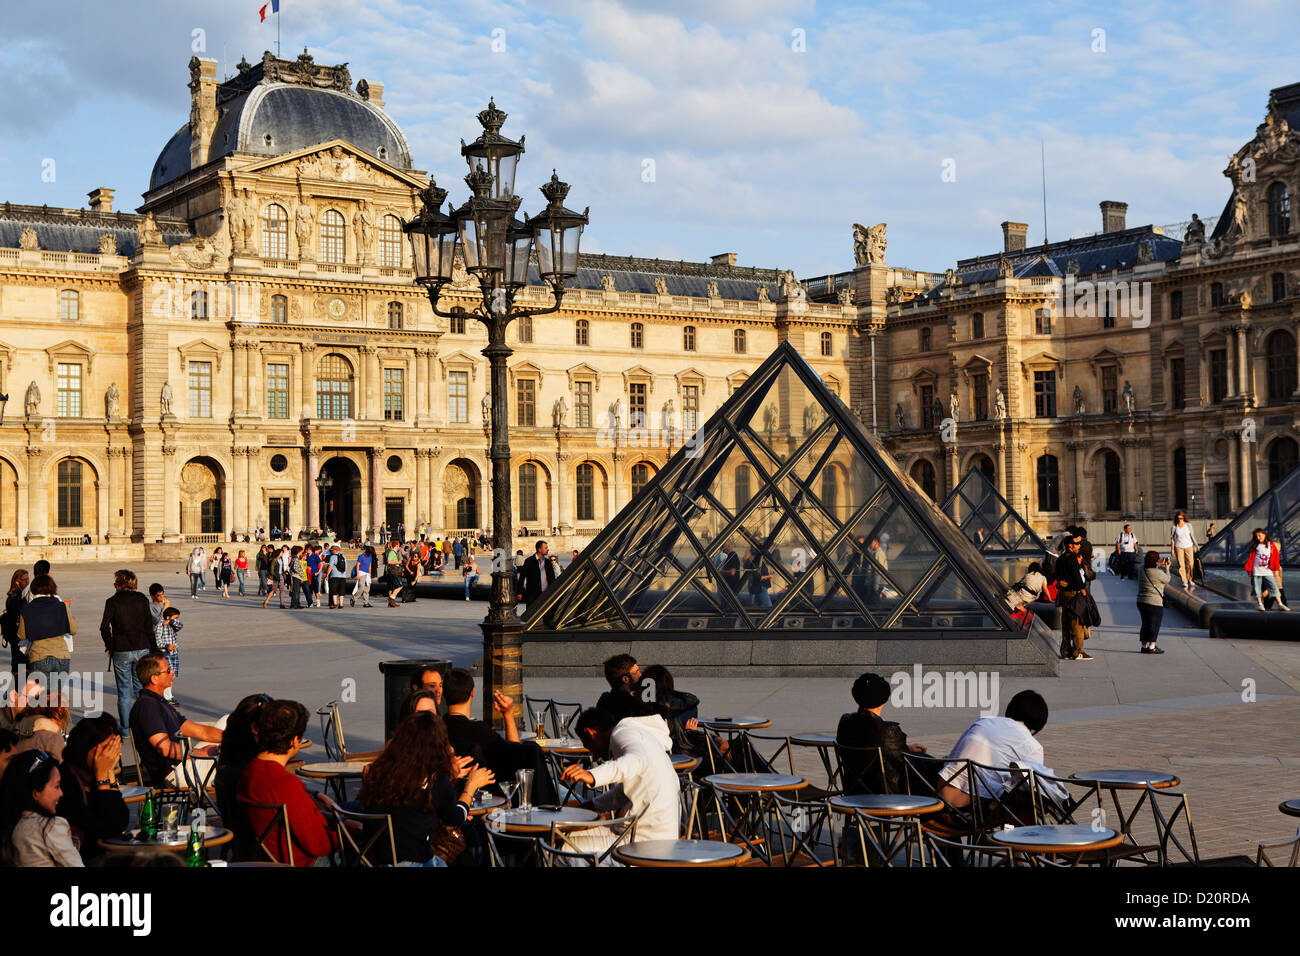 Louvre and the pyramid by I.M. Pei under clouded sky, Paris, France, Europe Stock Photo